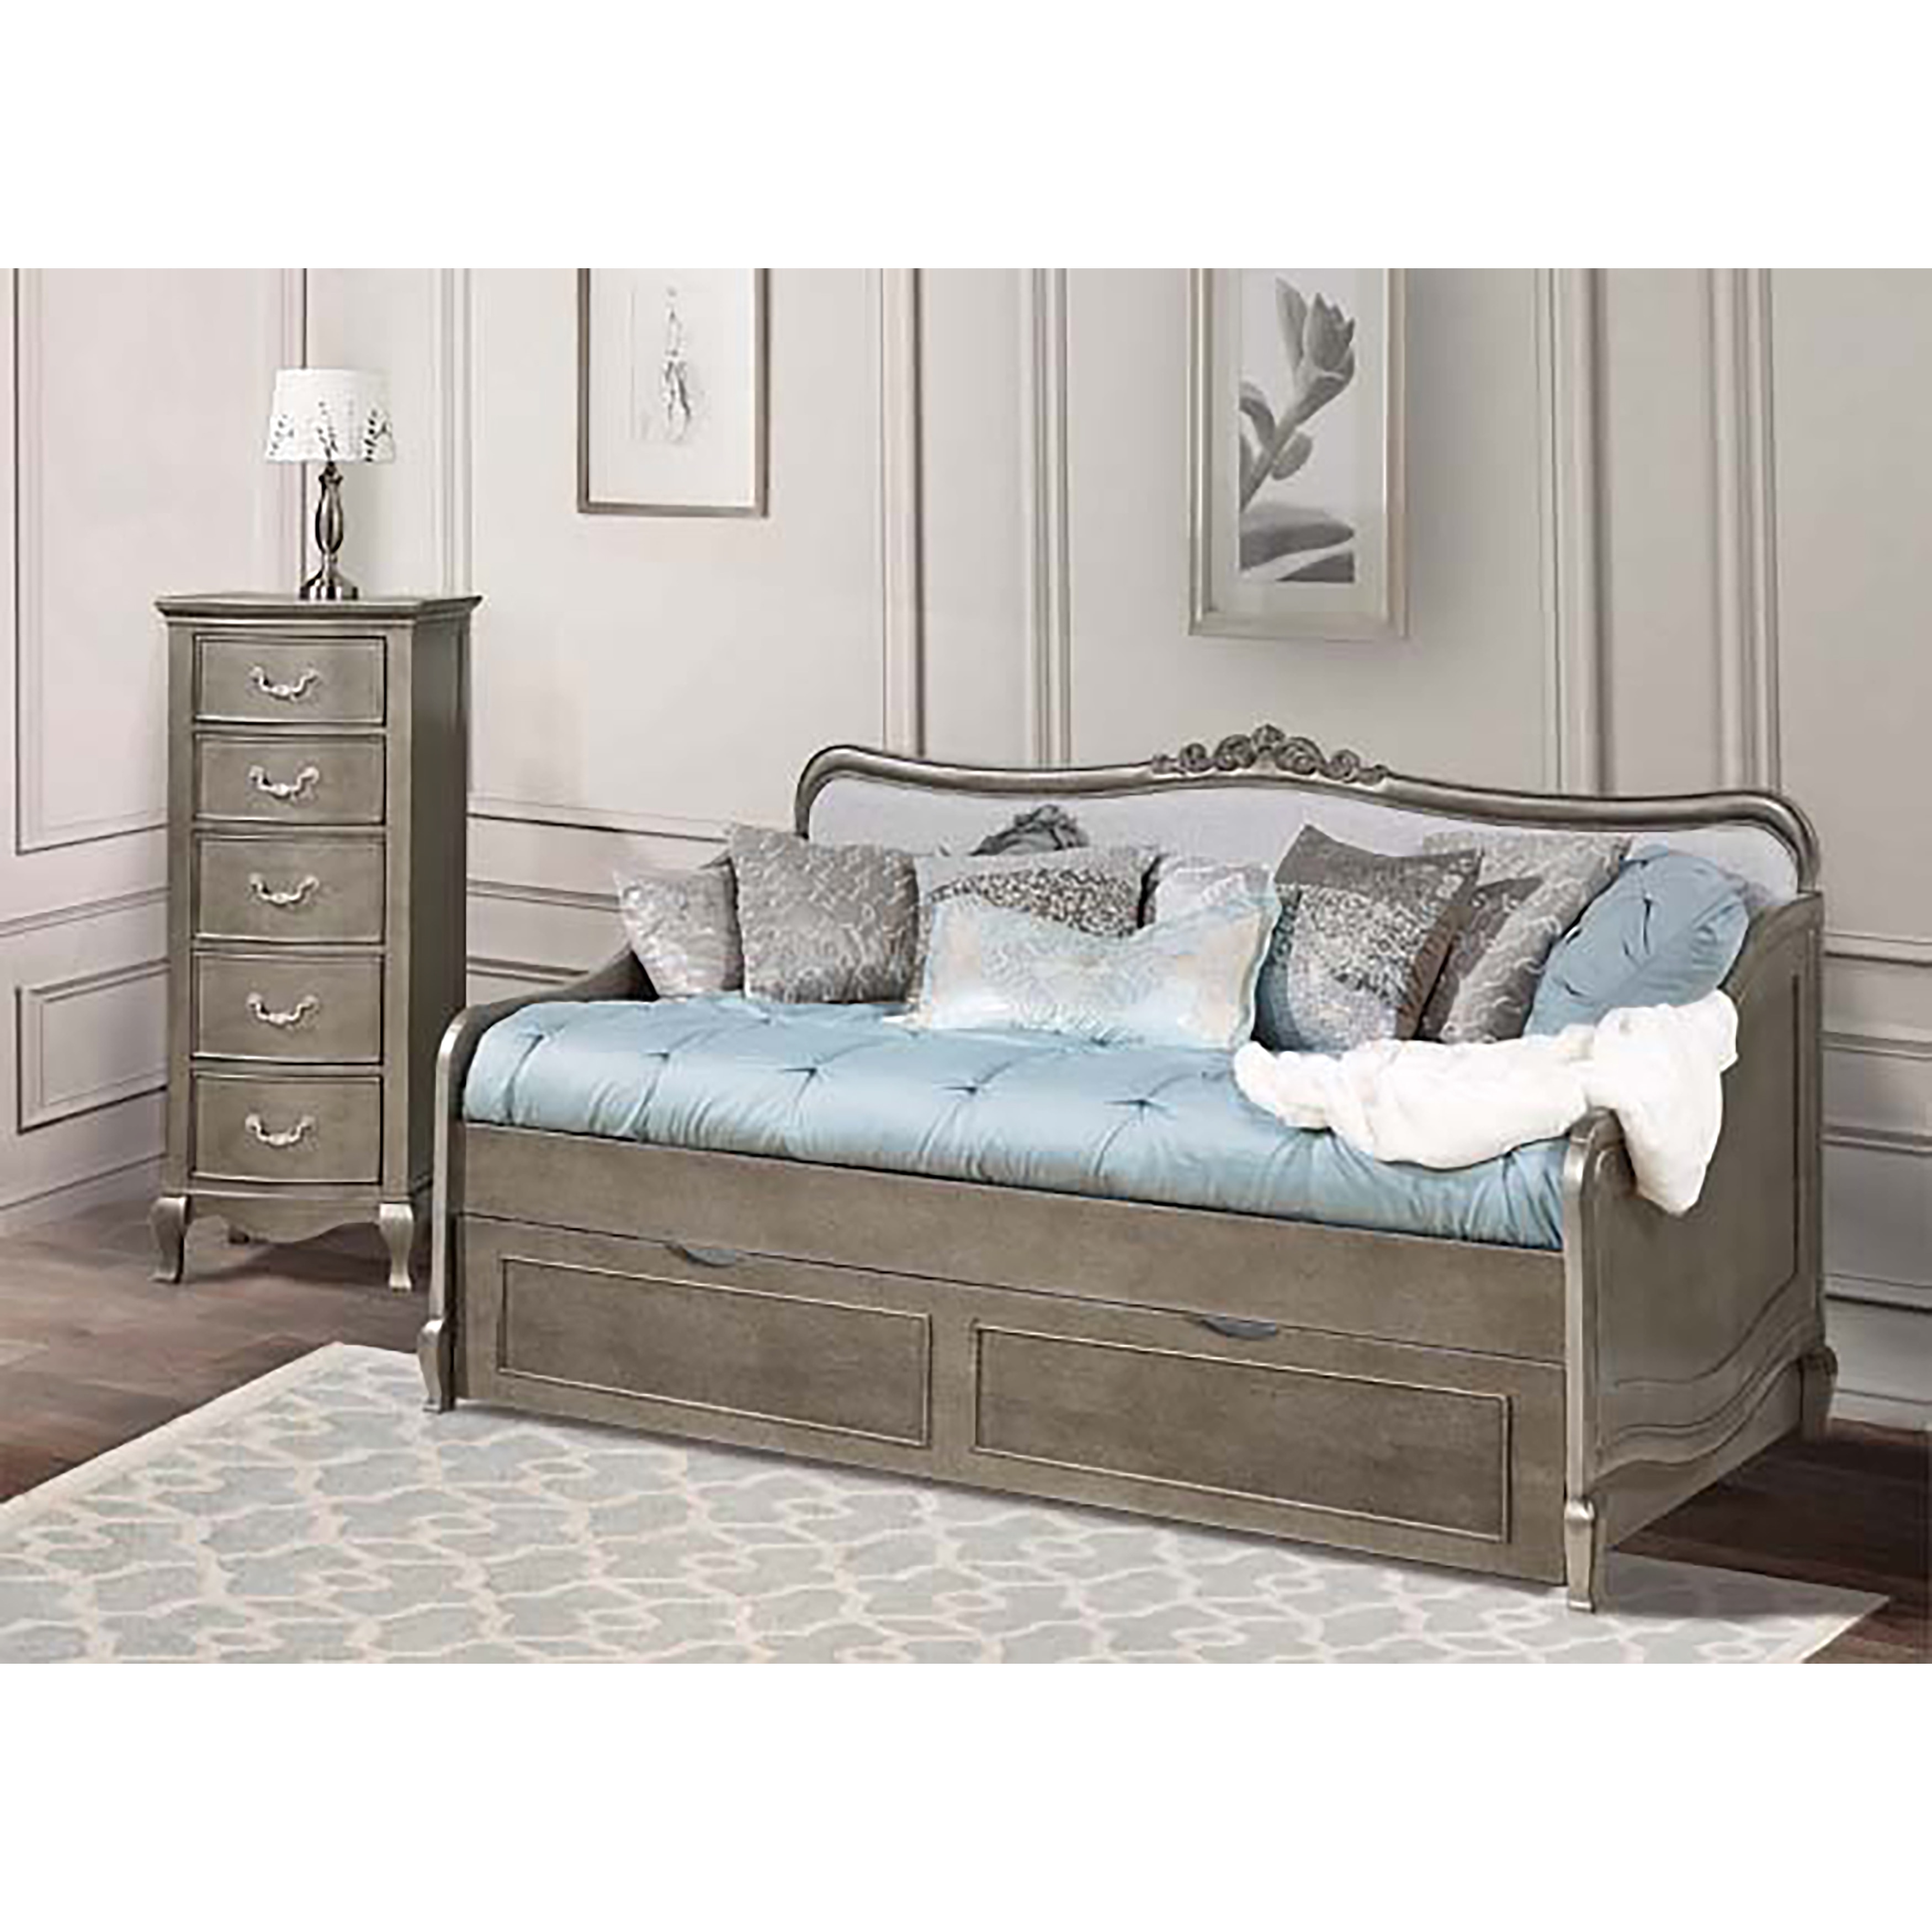 daybed with trundle bedding